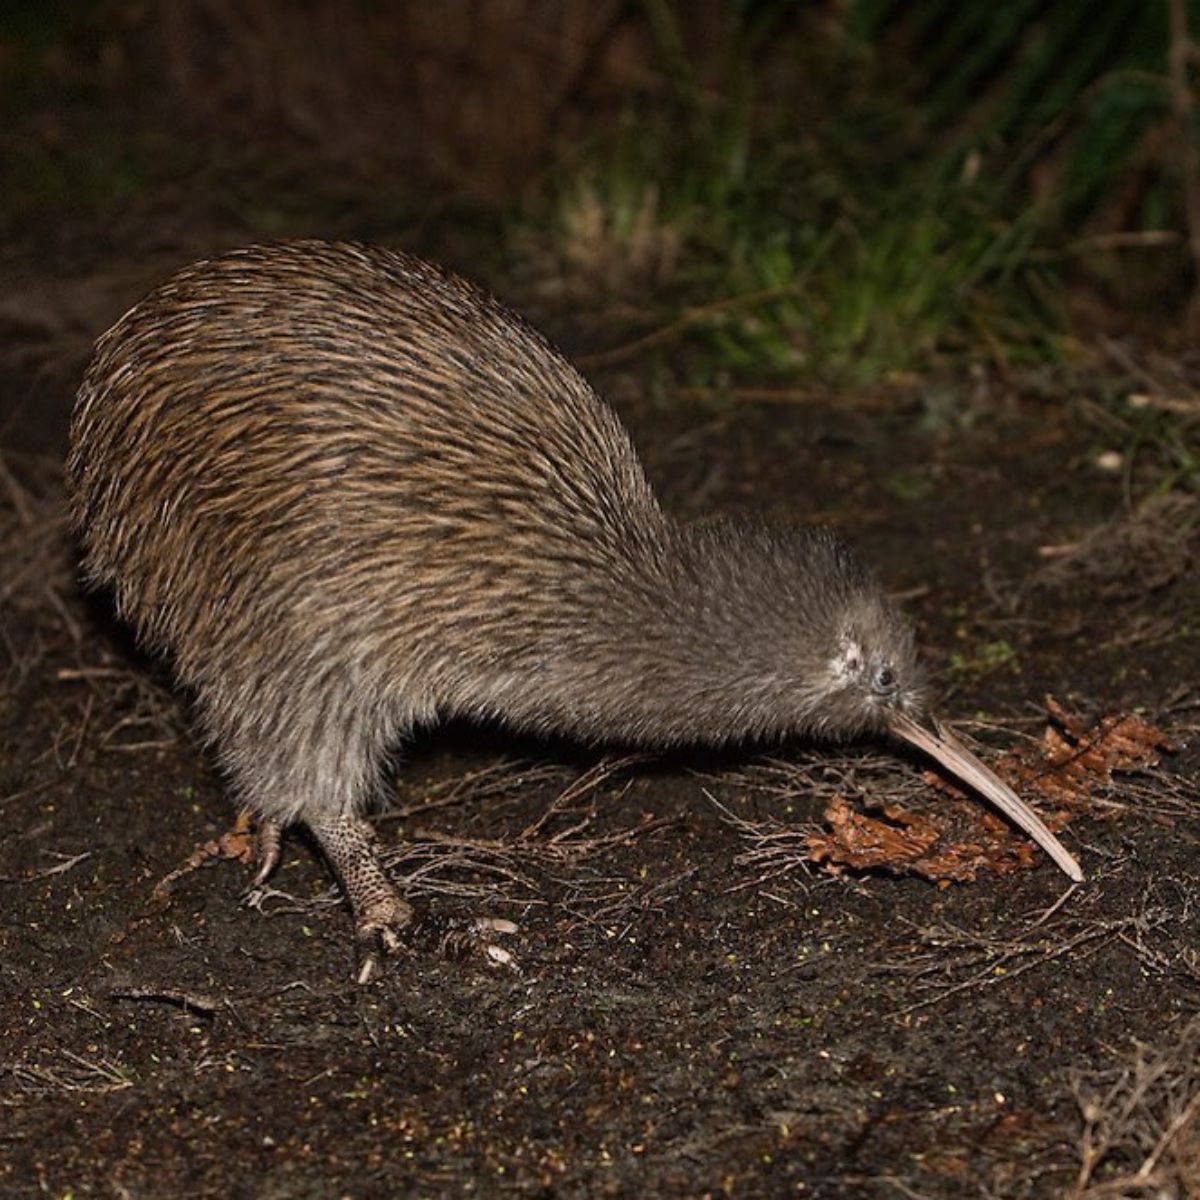 An adorable Kiwi during the night.